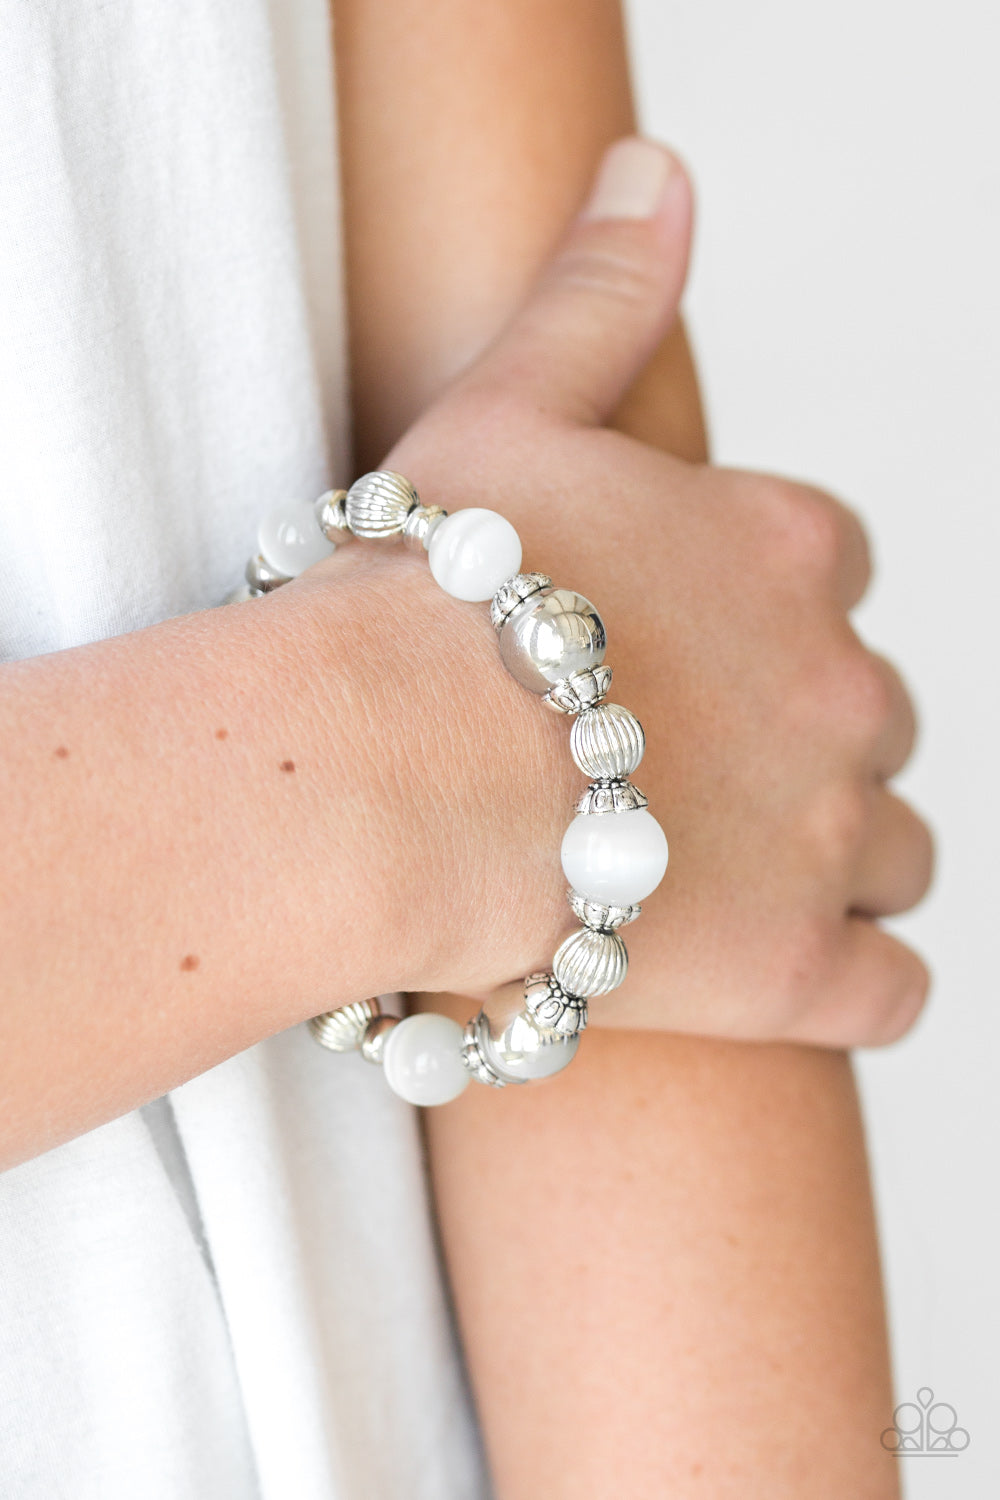 Paparazzi Once Upon A MARITIME - White - Ornate Silver Beads - Stretchy Band Bracelet - $5 Jewelry With Ashley Swint